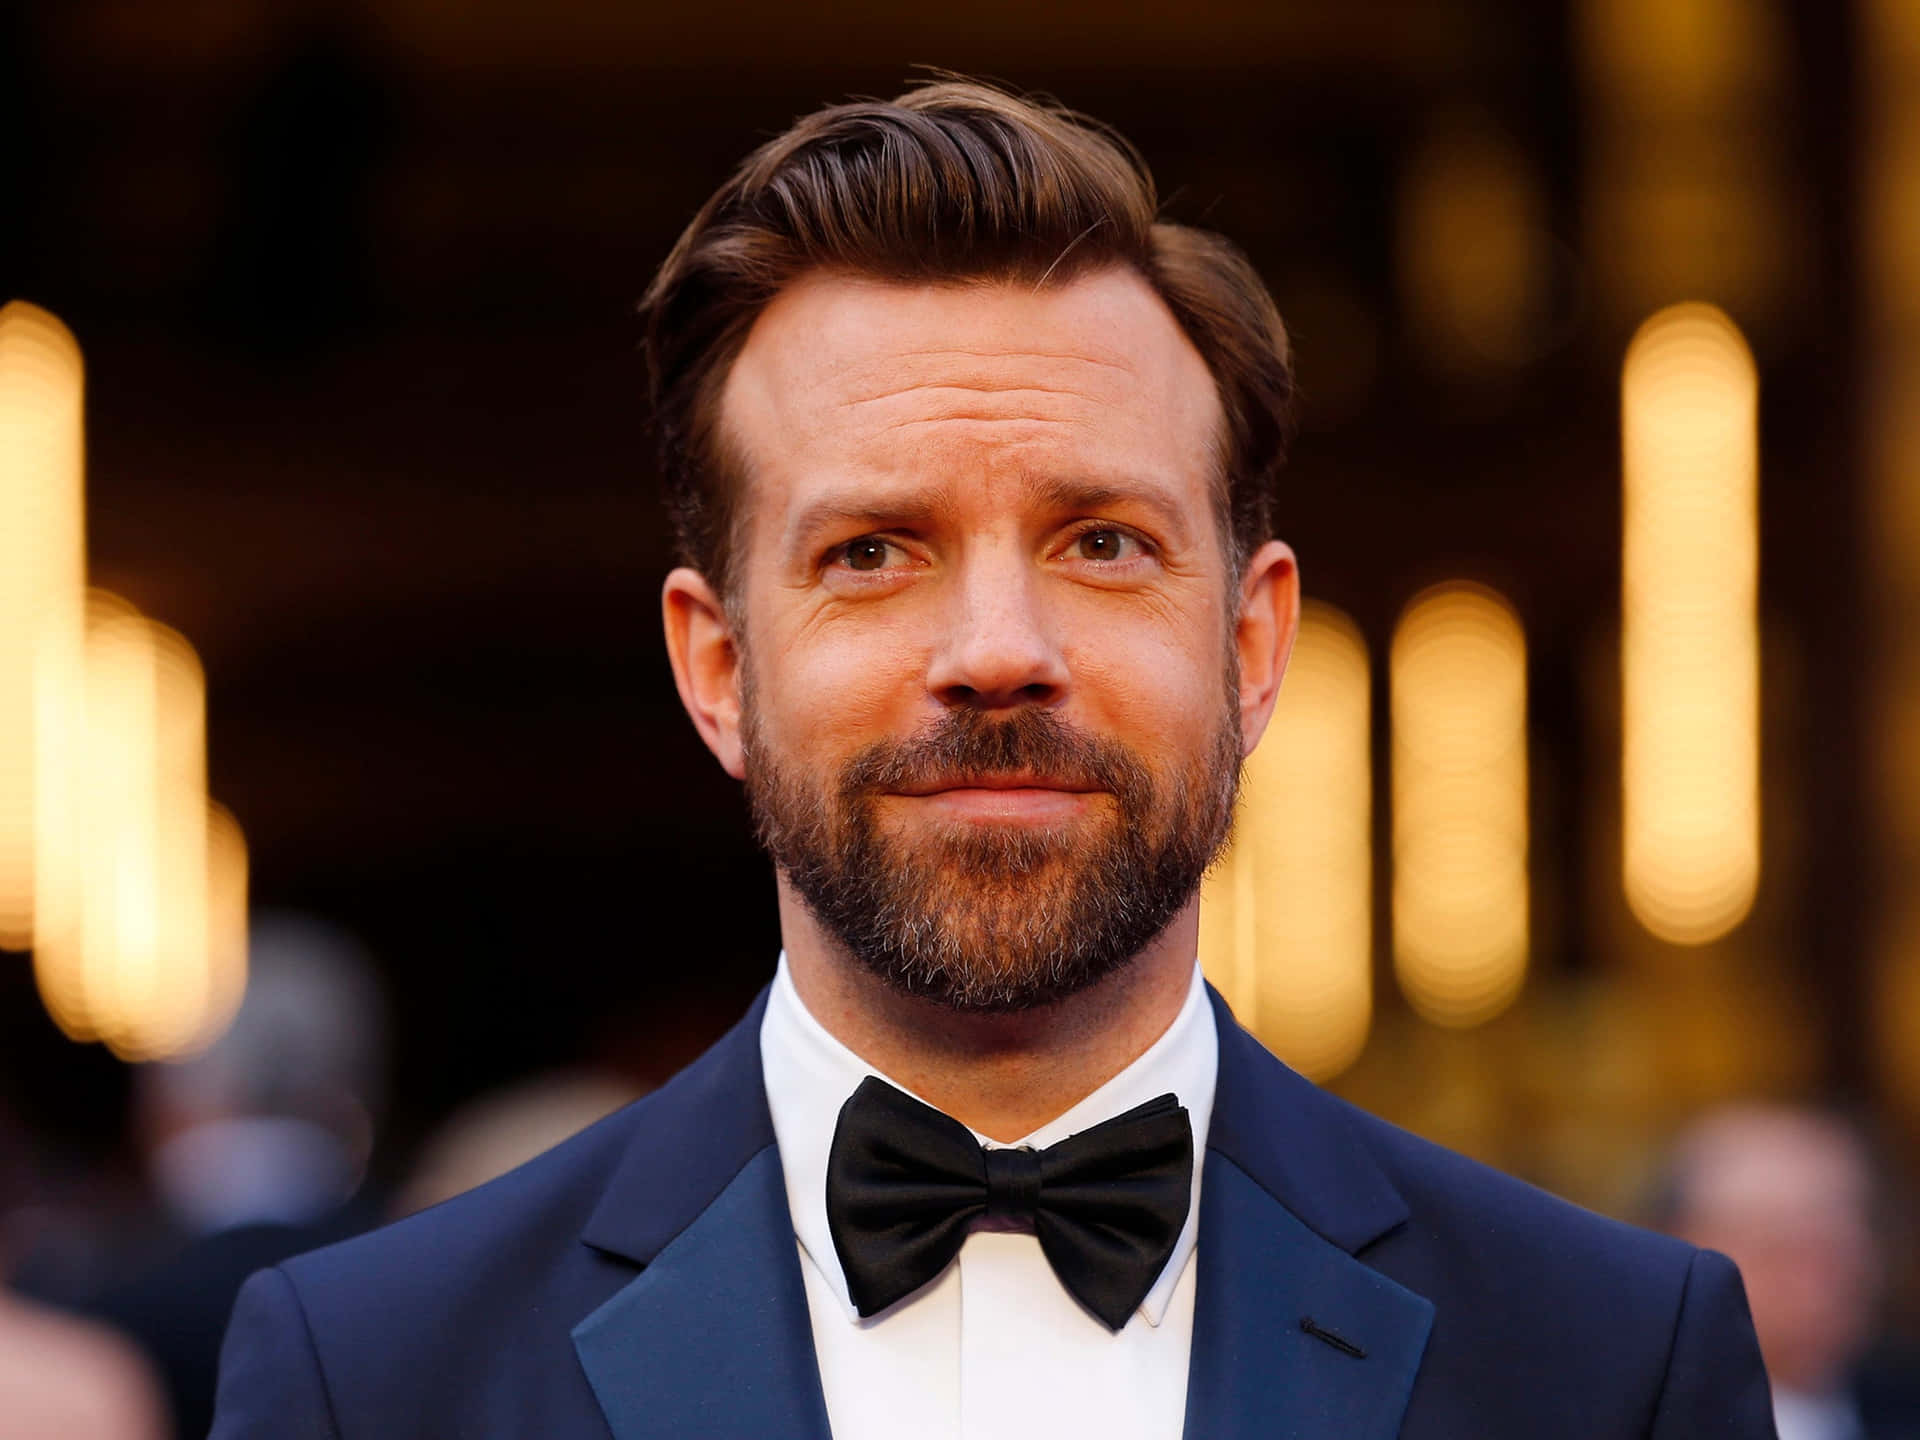 Jasonsudeikis Is Not A Sentence Related To Computer Or Mobile Wallpaper. Could You Please Provide A Sentence Related To Computer Or Mobile Wallpaper? Fondo de pantalla